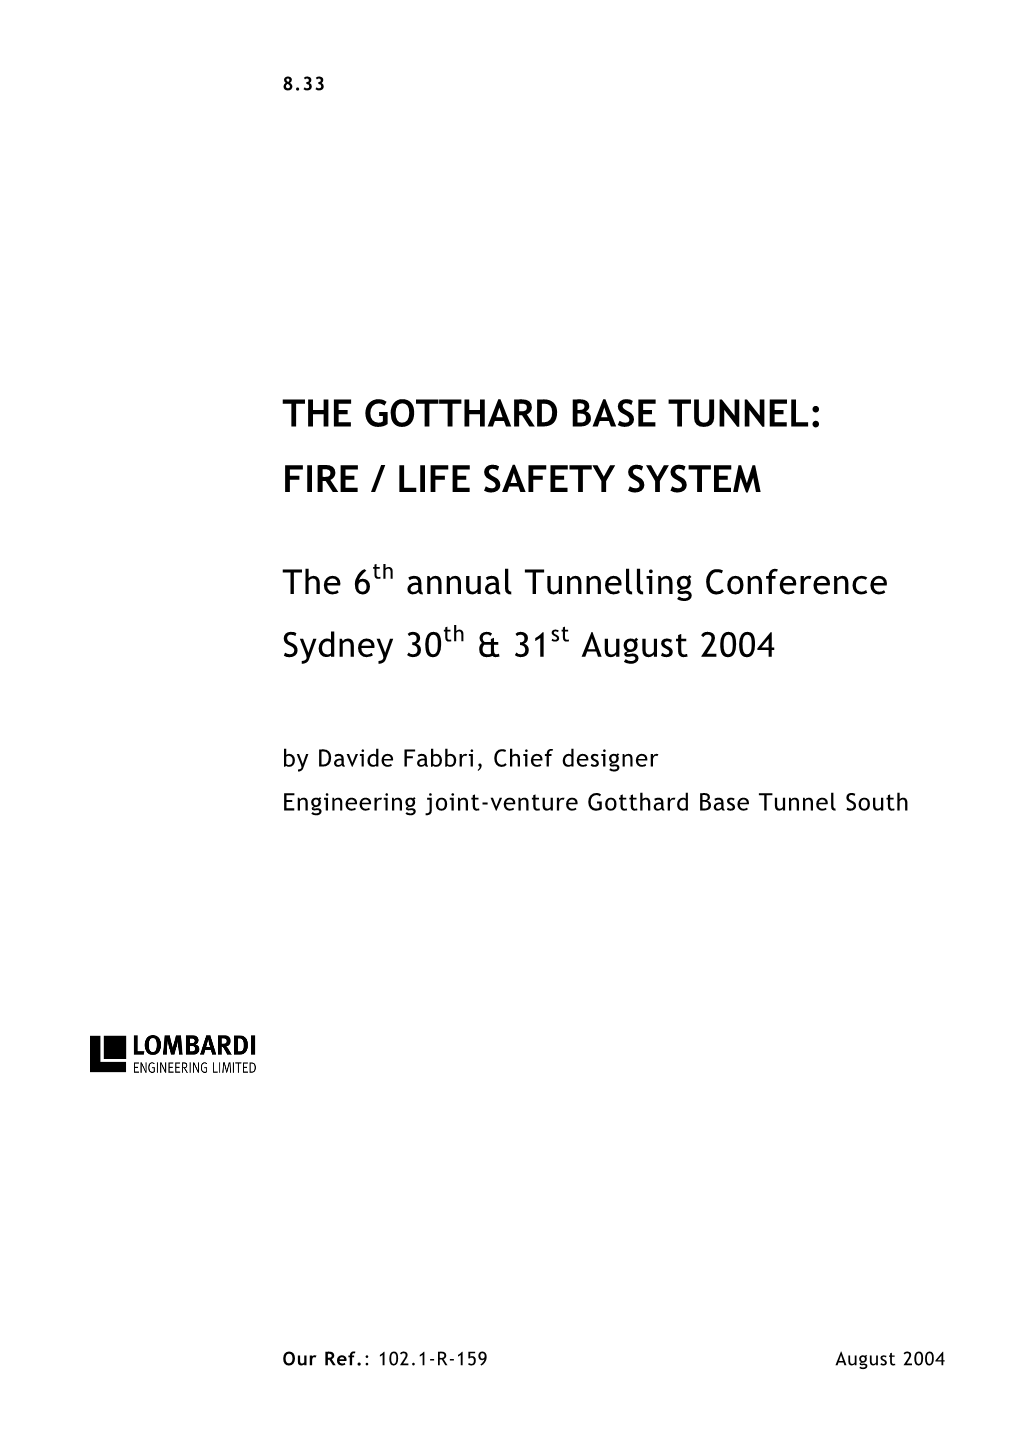 The Gotthard Base Tunnel: Fire / Life Safety System